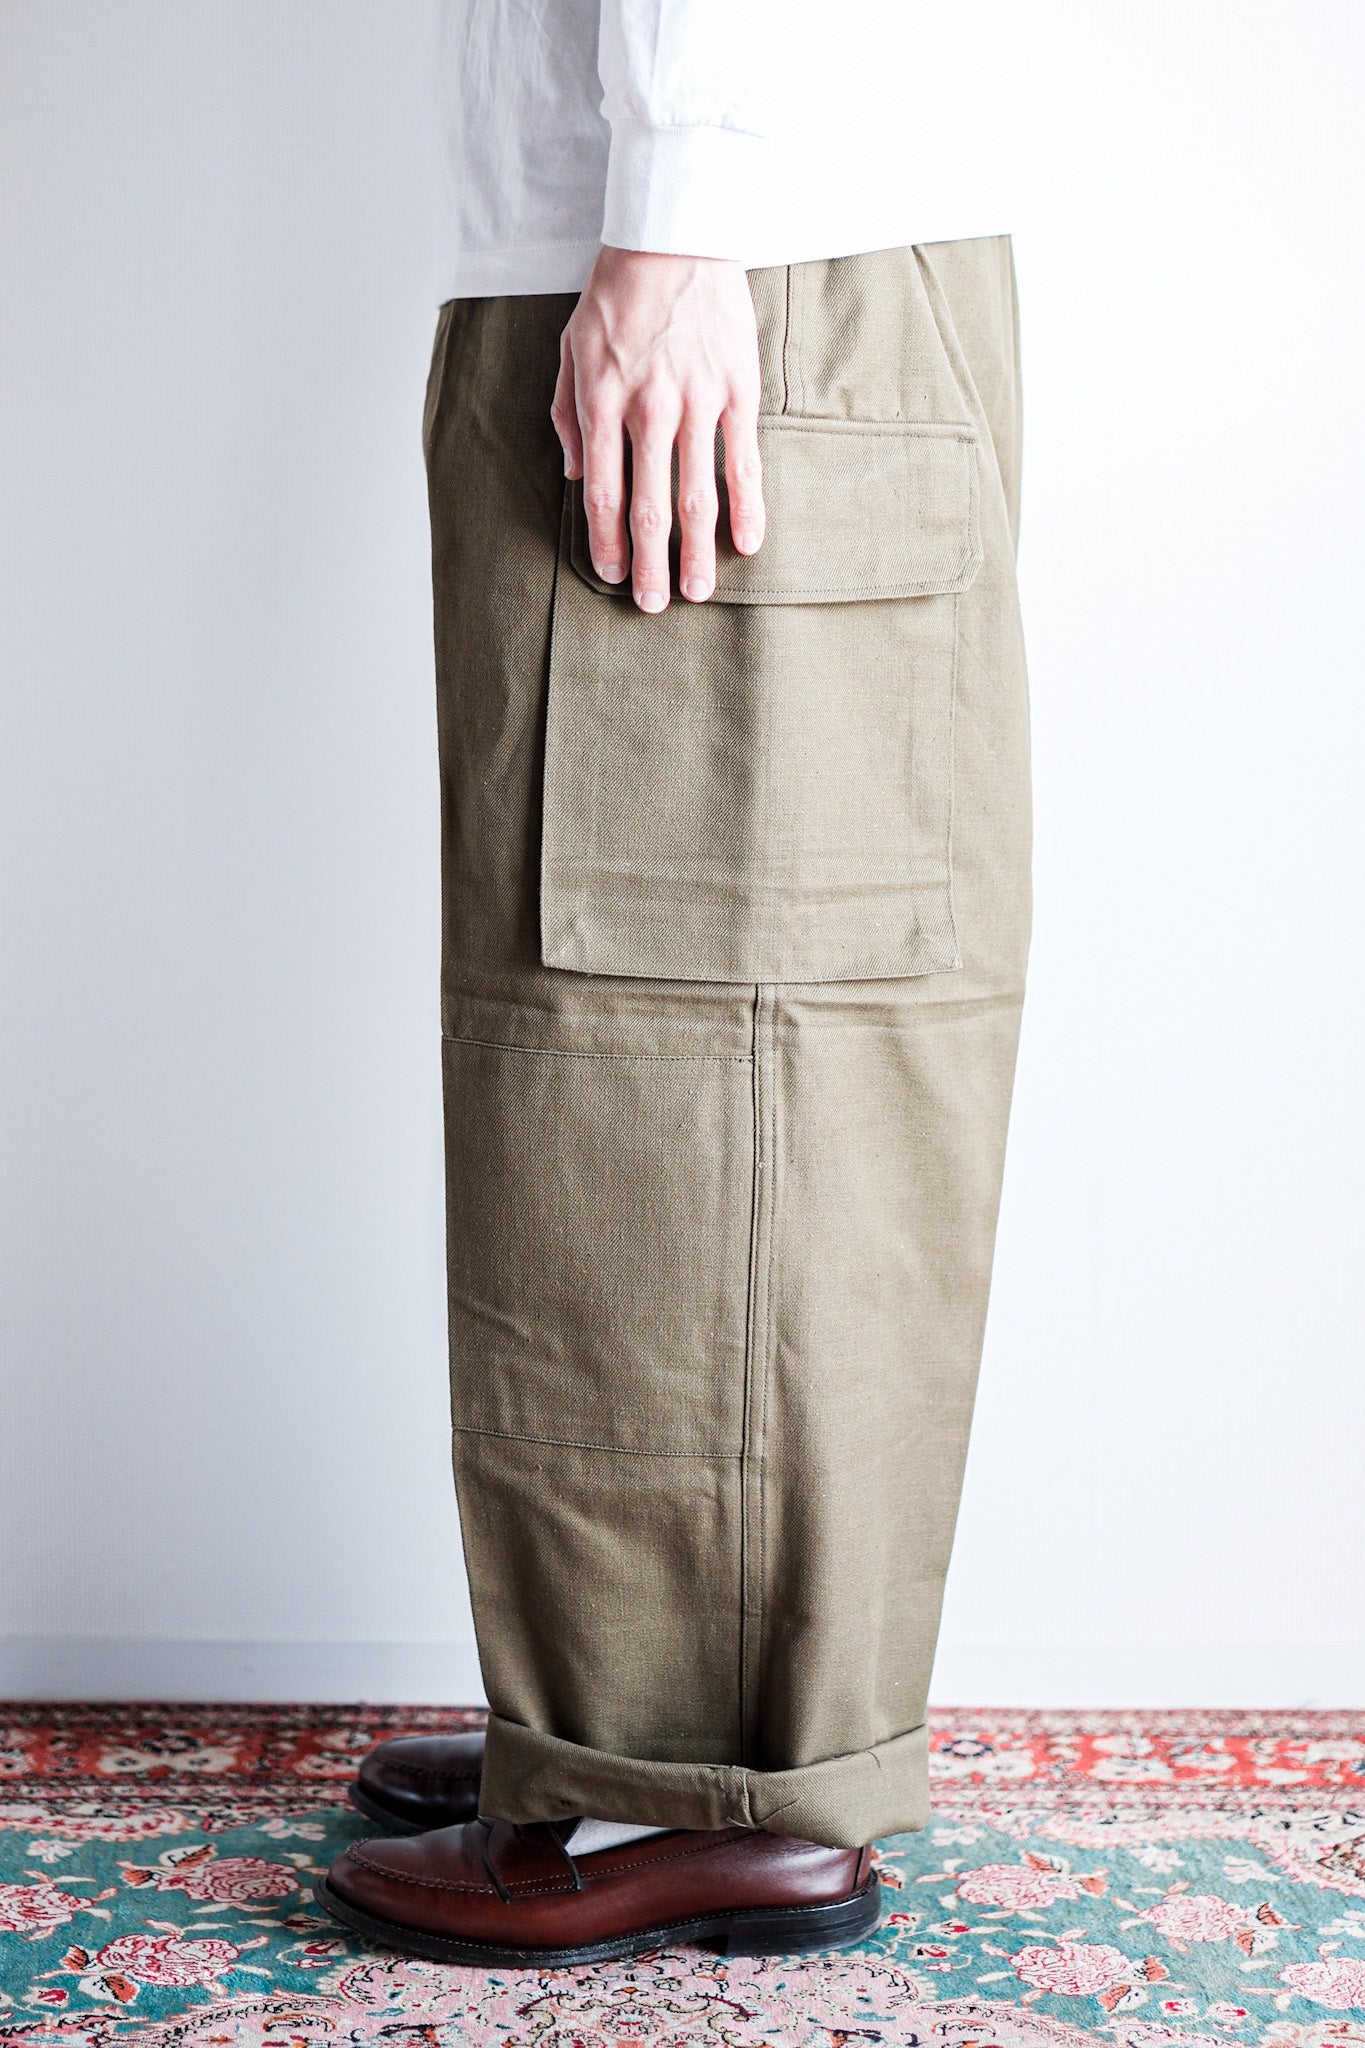 [~ 50's] French Army M47 Field Trousers Size.25 "Dead Stock"